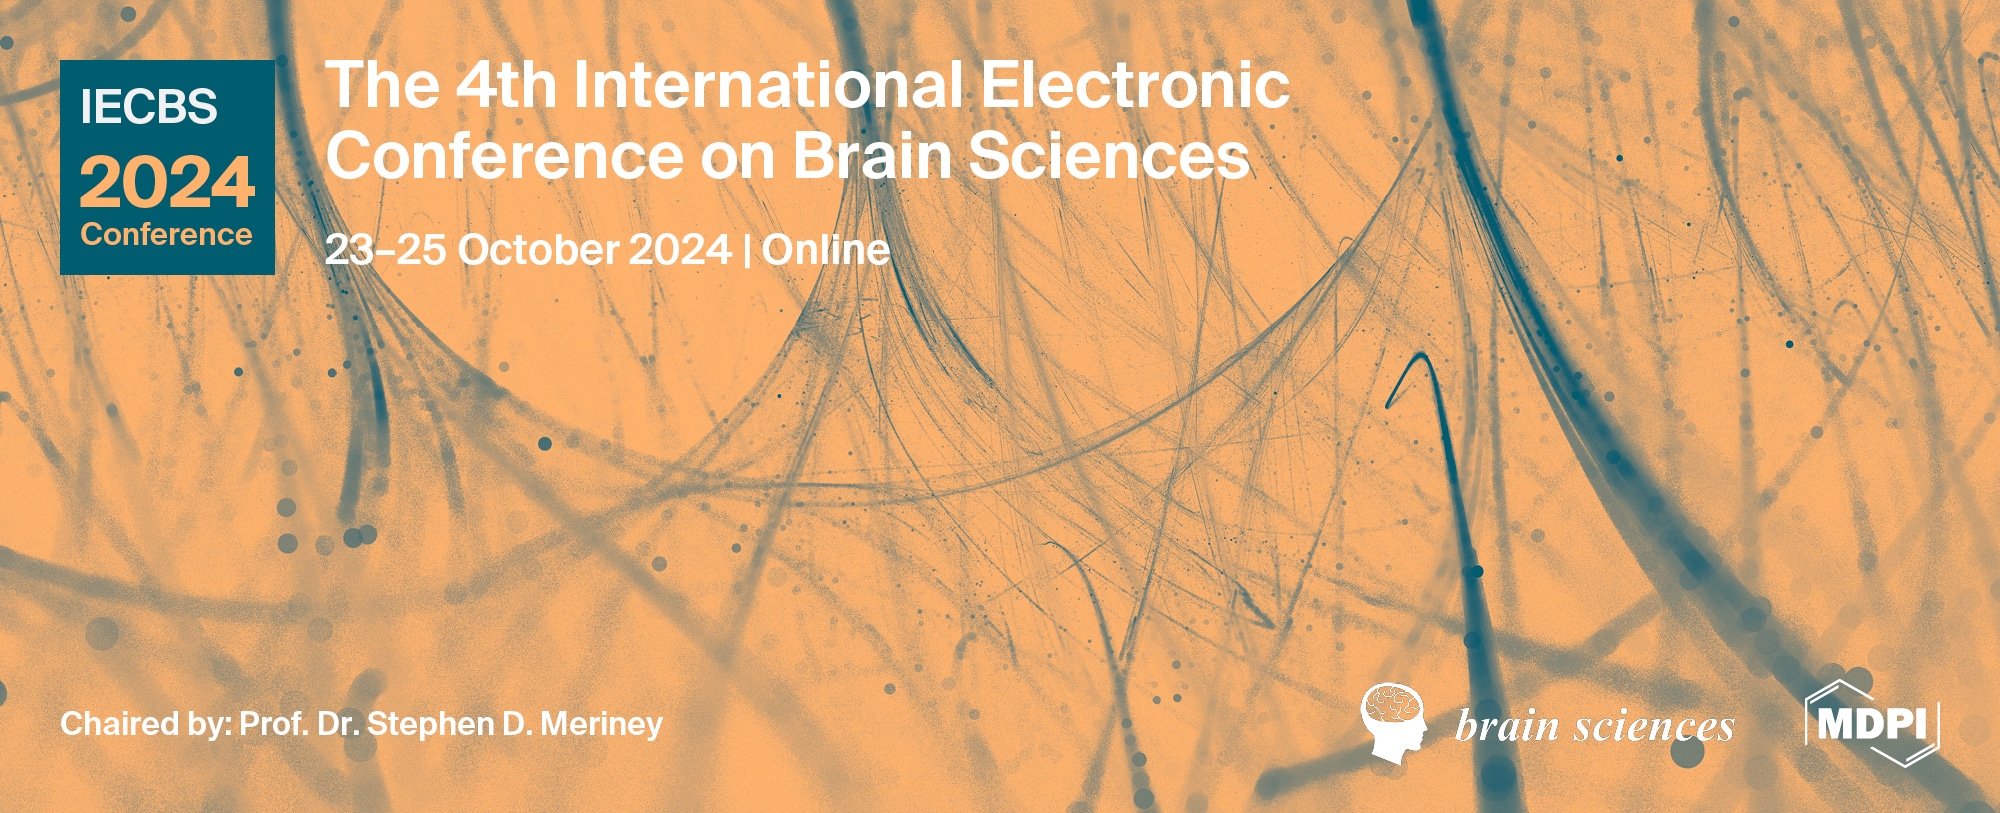 The 4th International Electronic Conference on Brain Sciences